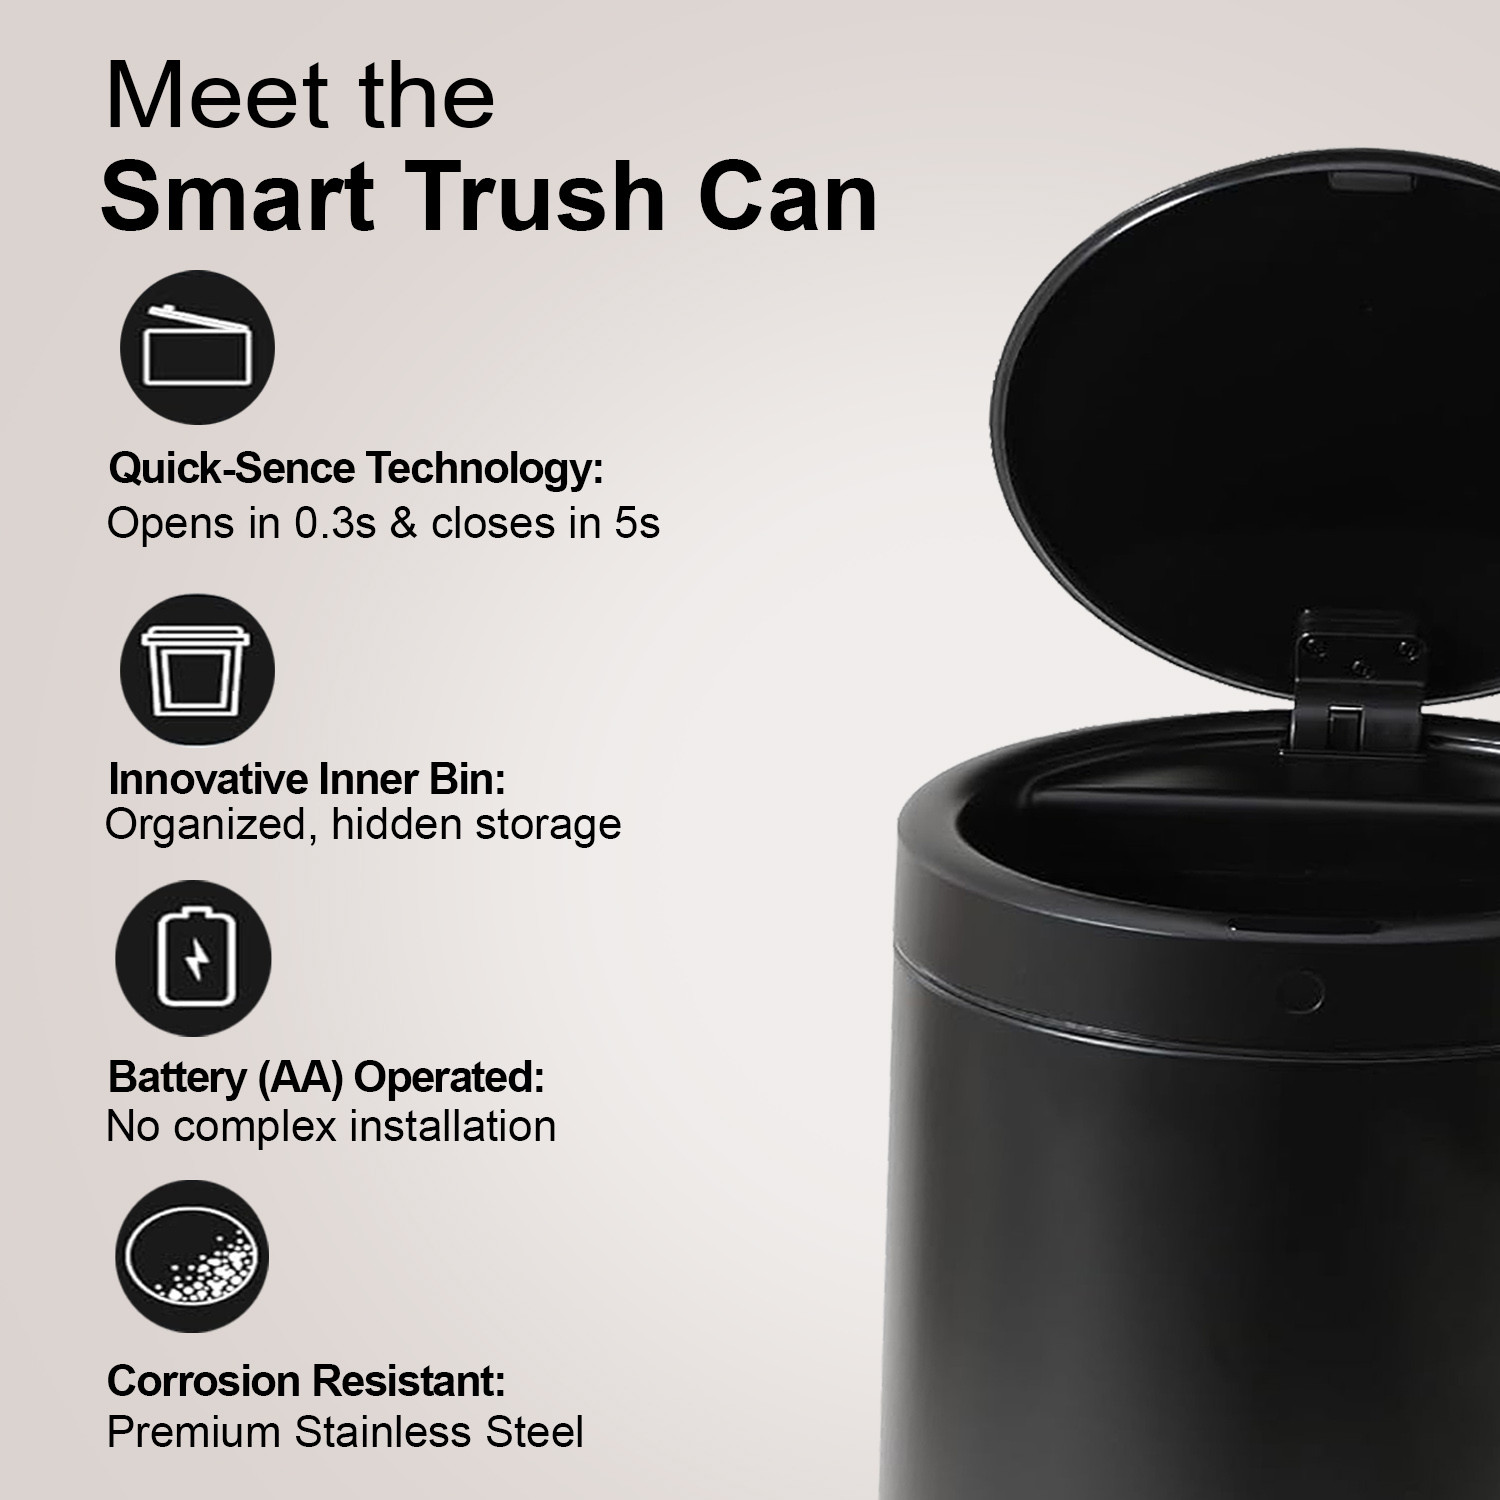 Kuber Industries Sensor Dustbin | Round Big Sensor Dustbin | Touchless Trash Can | Smart Dustbin for Bedroom-Office-Living Room | Automatic Garbage Can | HN-ZR-BLK-30L | Black